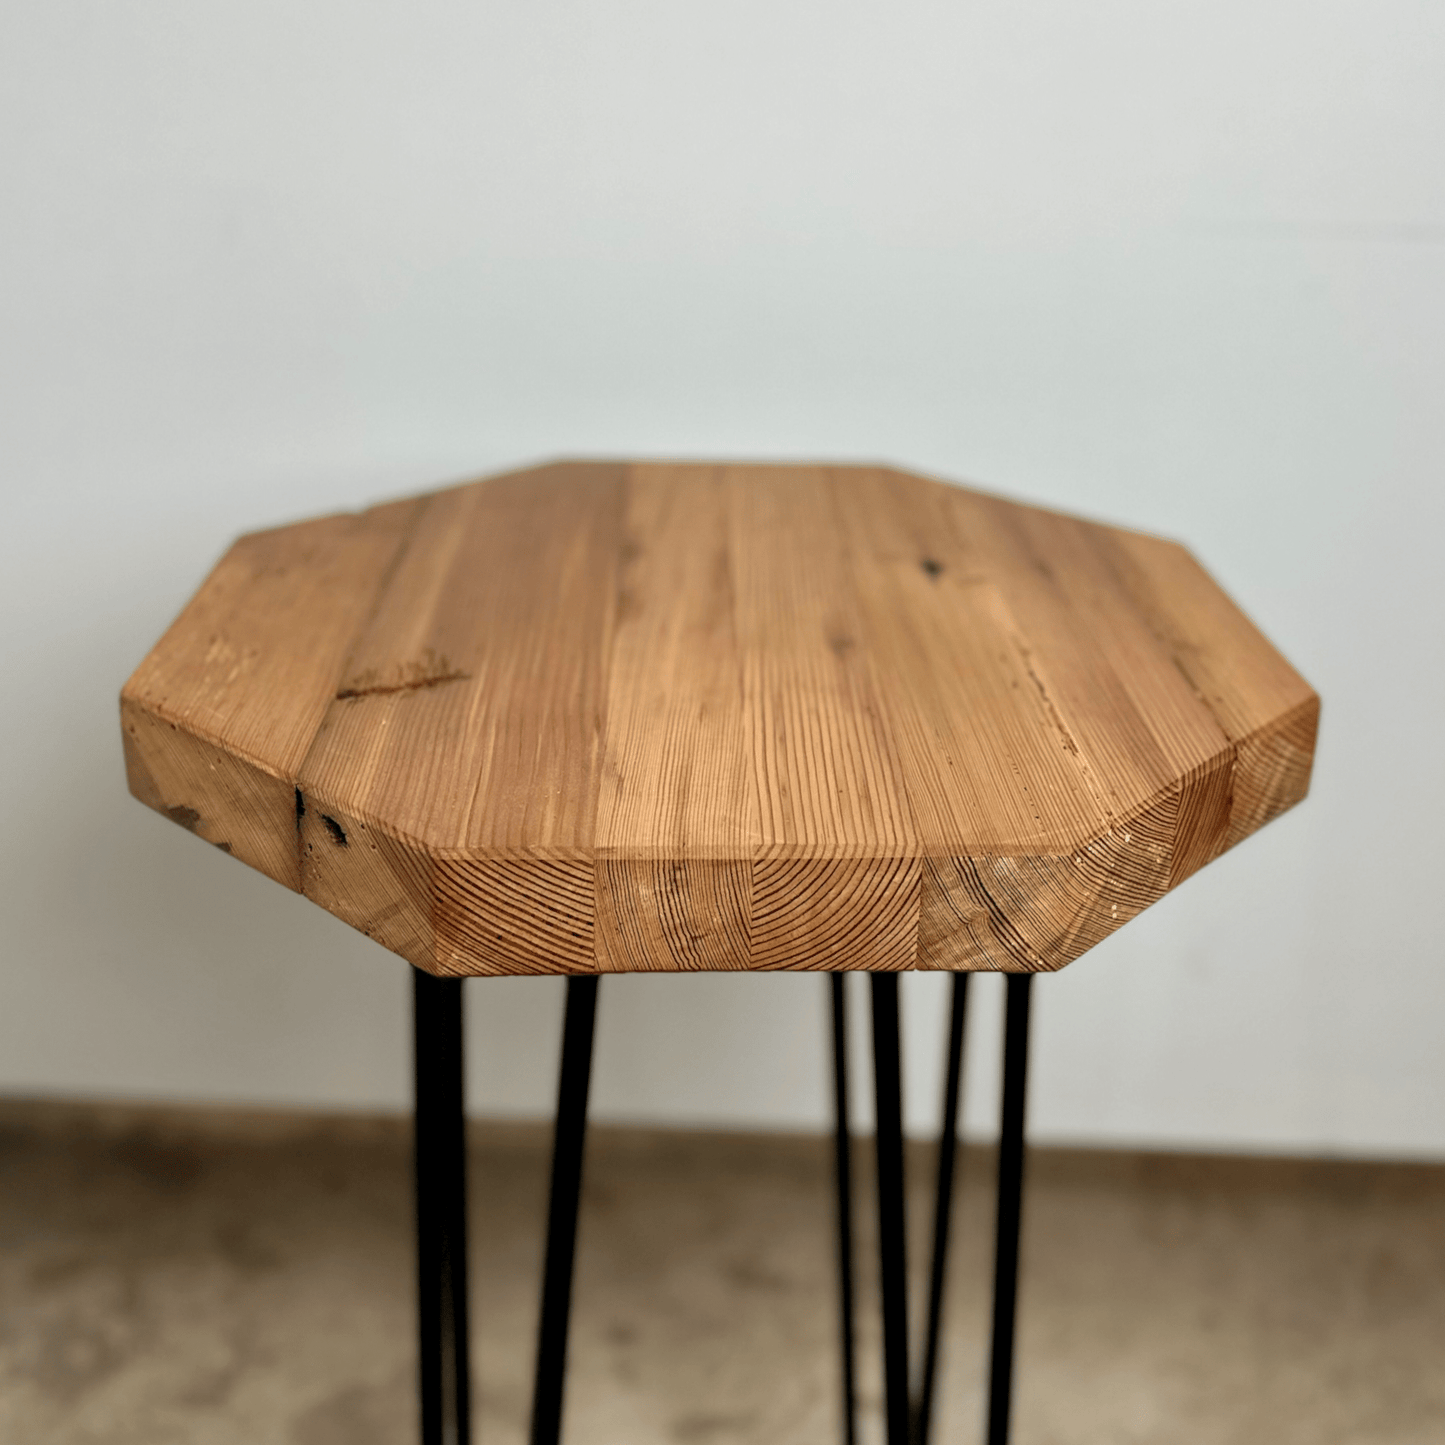 a reclaimed wood table in an octagonal shape and oil finish. The table is supported by four hairpin legs. Grain patterns and color variations in the wood are shown.